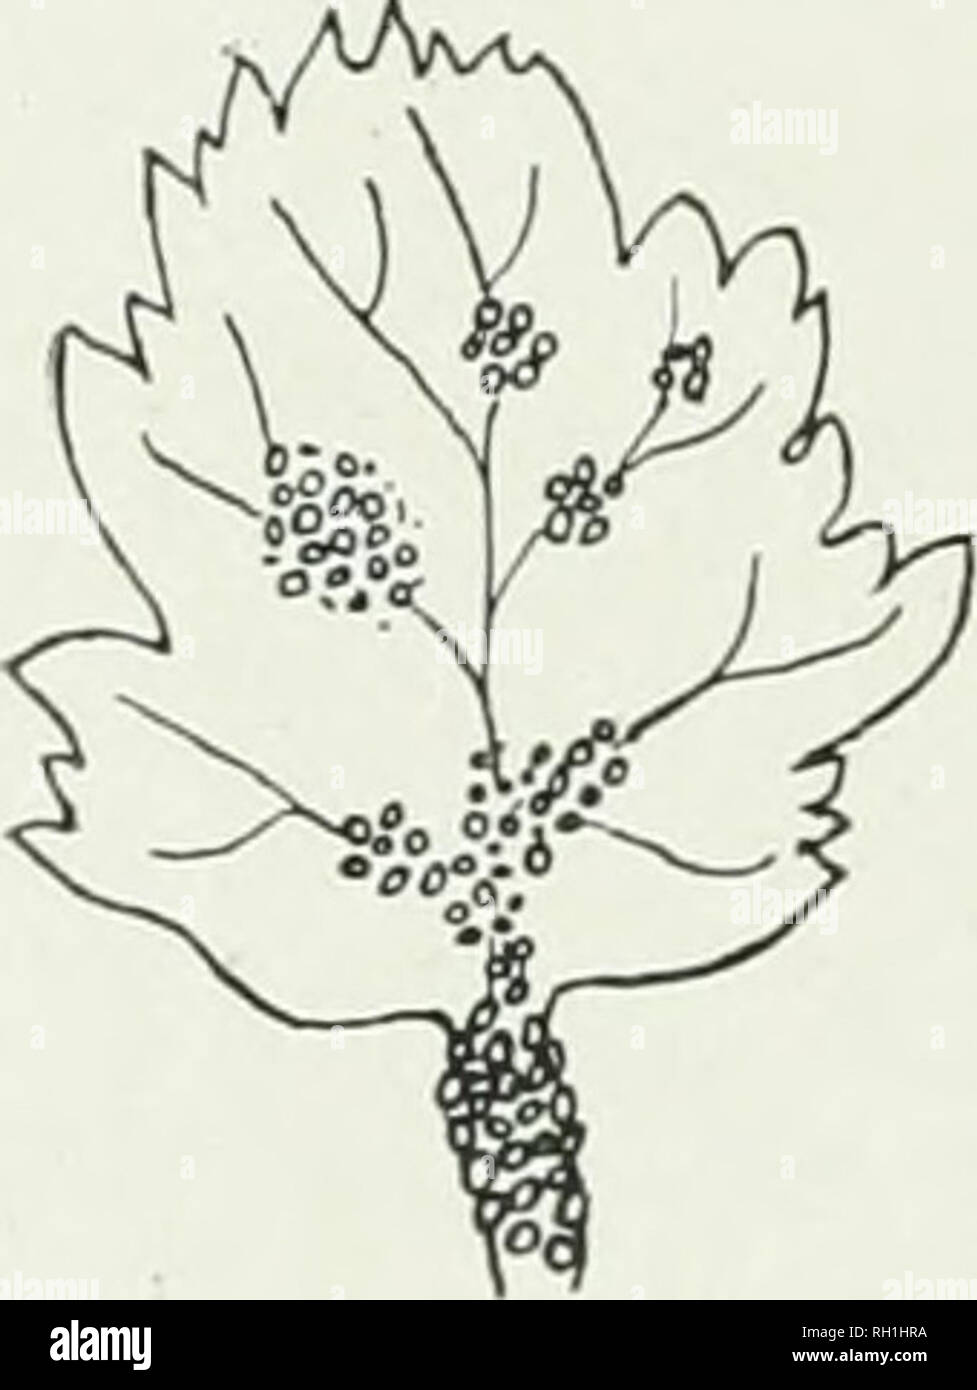 . The British rust fungi (Uredinales), their biology and classification. Uredineae. 194 PUCCINI A 66. Puccinia Heraclei Giev. Trichohasis Heraclei Berk. ; Cooke, Micr. Fung. p. 225. Puccinia Heraclei Grev. Scot. Cr. Flor. pi. 42. Cooke, Handb. p. 502 ; Micr. Fung. p. 208. Sydow, Monogr. i. 387. Fischer, Ured. Schweiz, p. 132. P. Pimpinellae Strauss ; Plowr. Ured. p. 155 p.p. Sper^mogones. Amphigenous, scattered amongst the gecidia, pale-yellowish. jEcidiospores. Jllcidia hypophyllous, frequently on the petioles and especially on the nerves of the leaves, on thickened yellowish spots, densely c Stock Photo